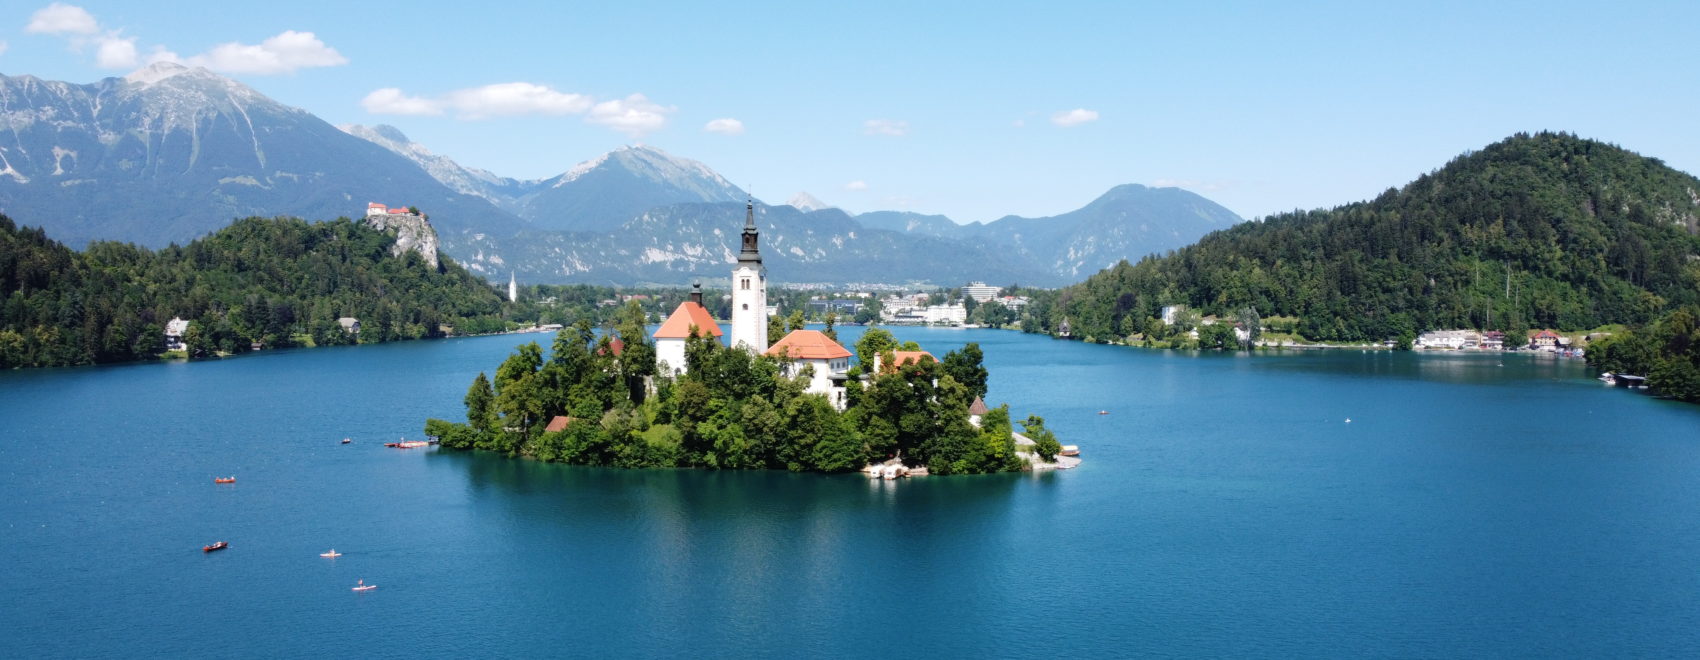 The Perfect Summer Day at Lake Bled - Forget Someday